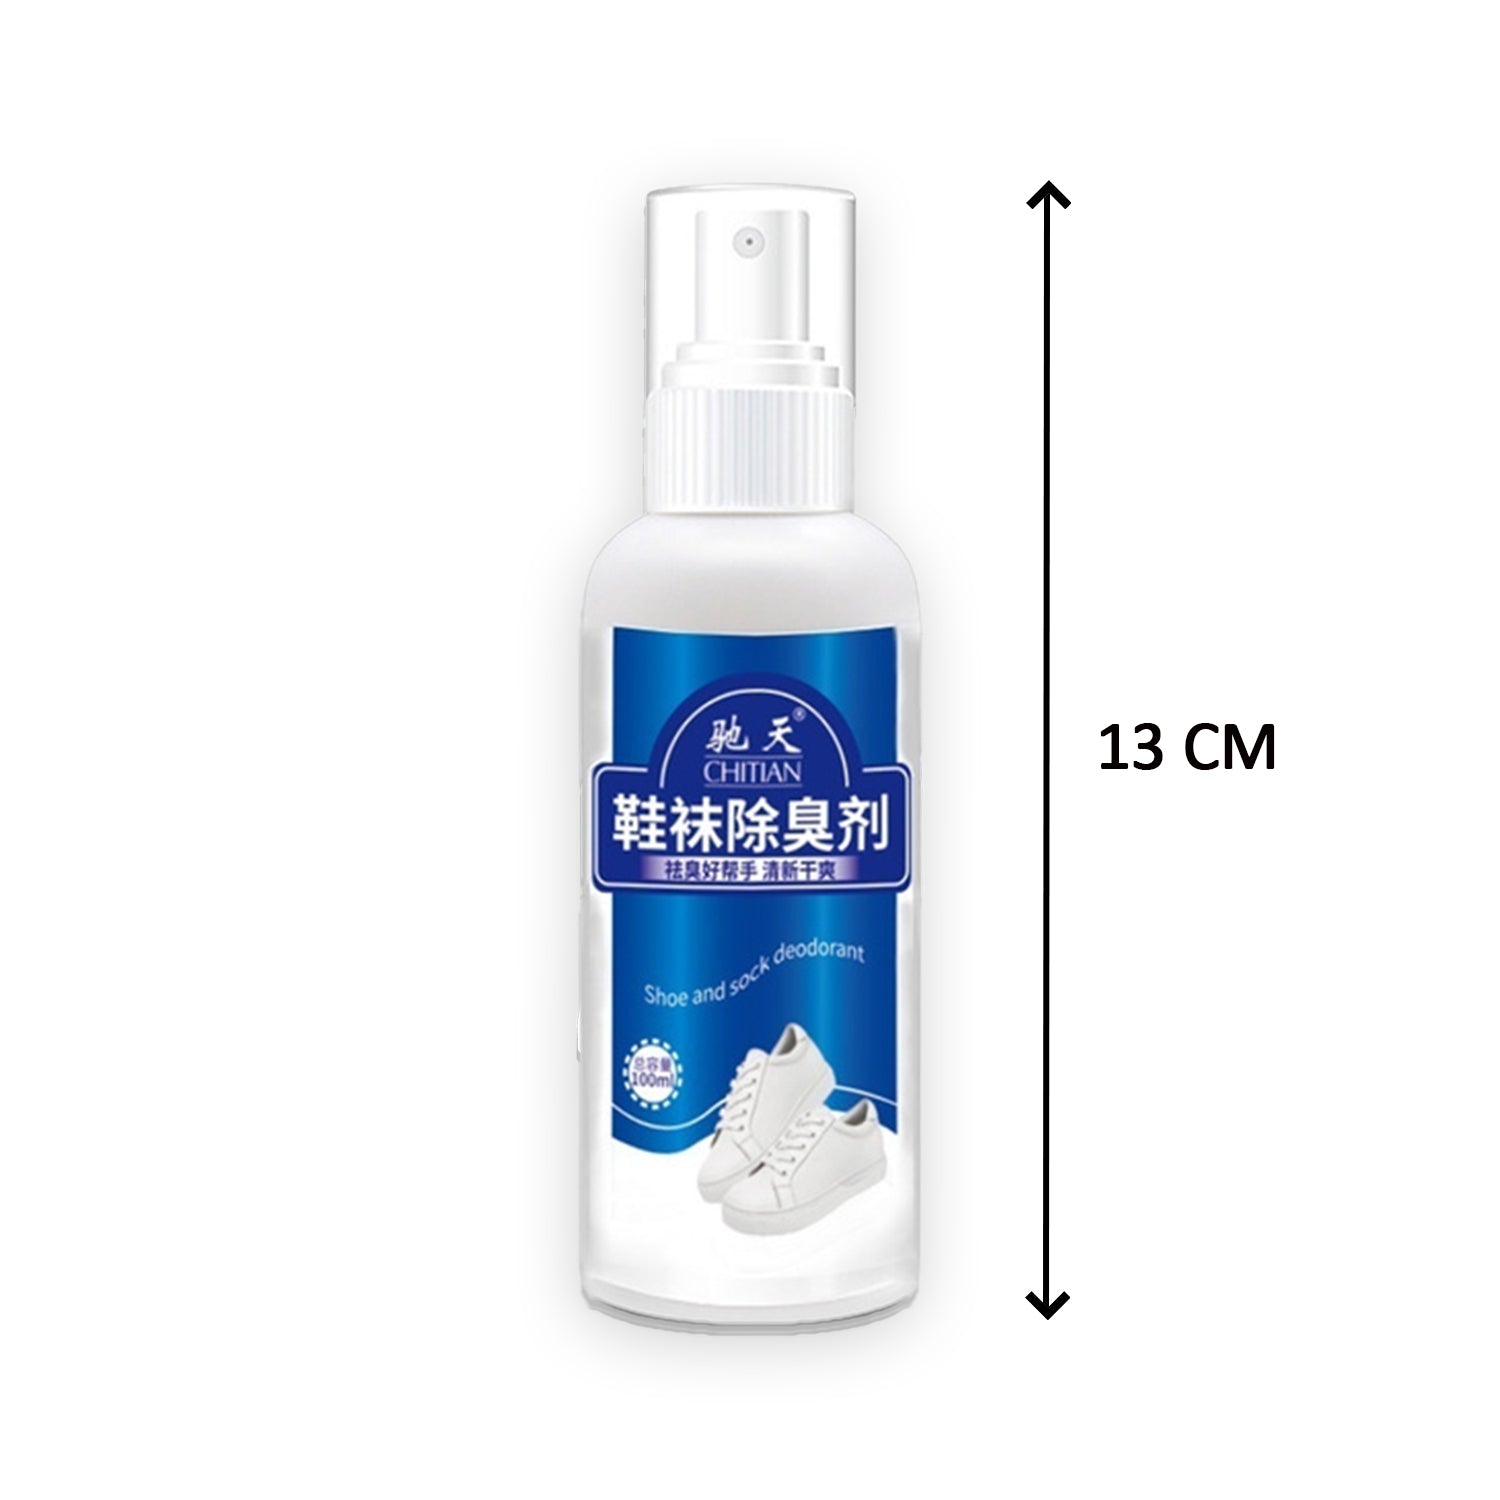 6153 Shoes Stink Freshener widely used as a stink remover and making them fresh as new purposes.